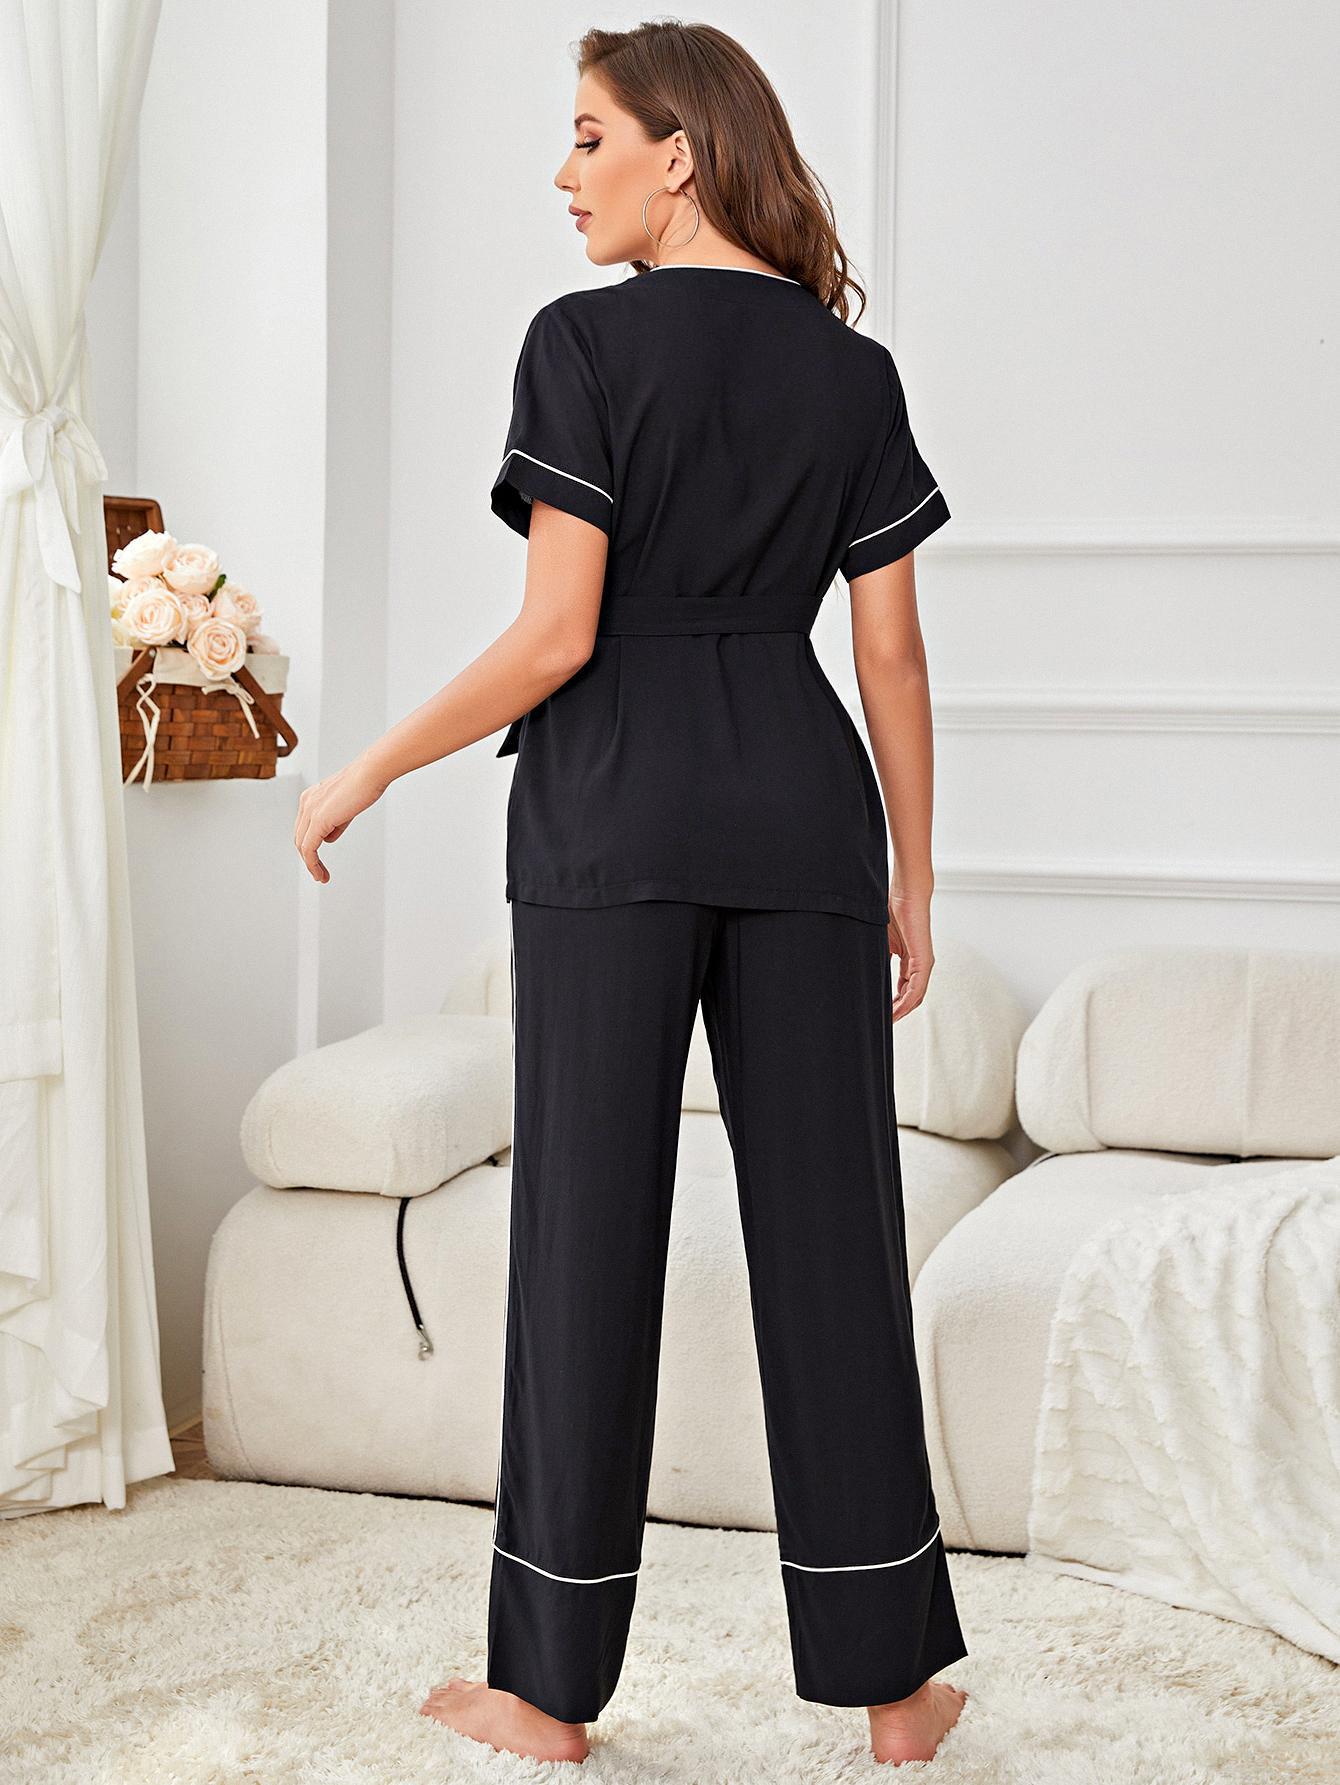 Women’s Contrast Piping Belted Top and Pants Pajama Set